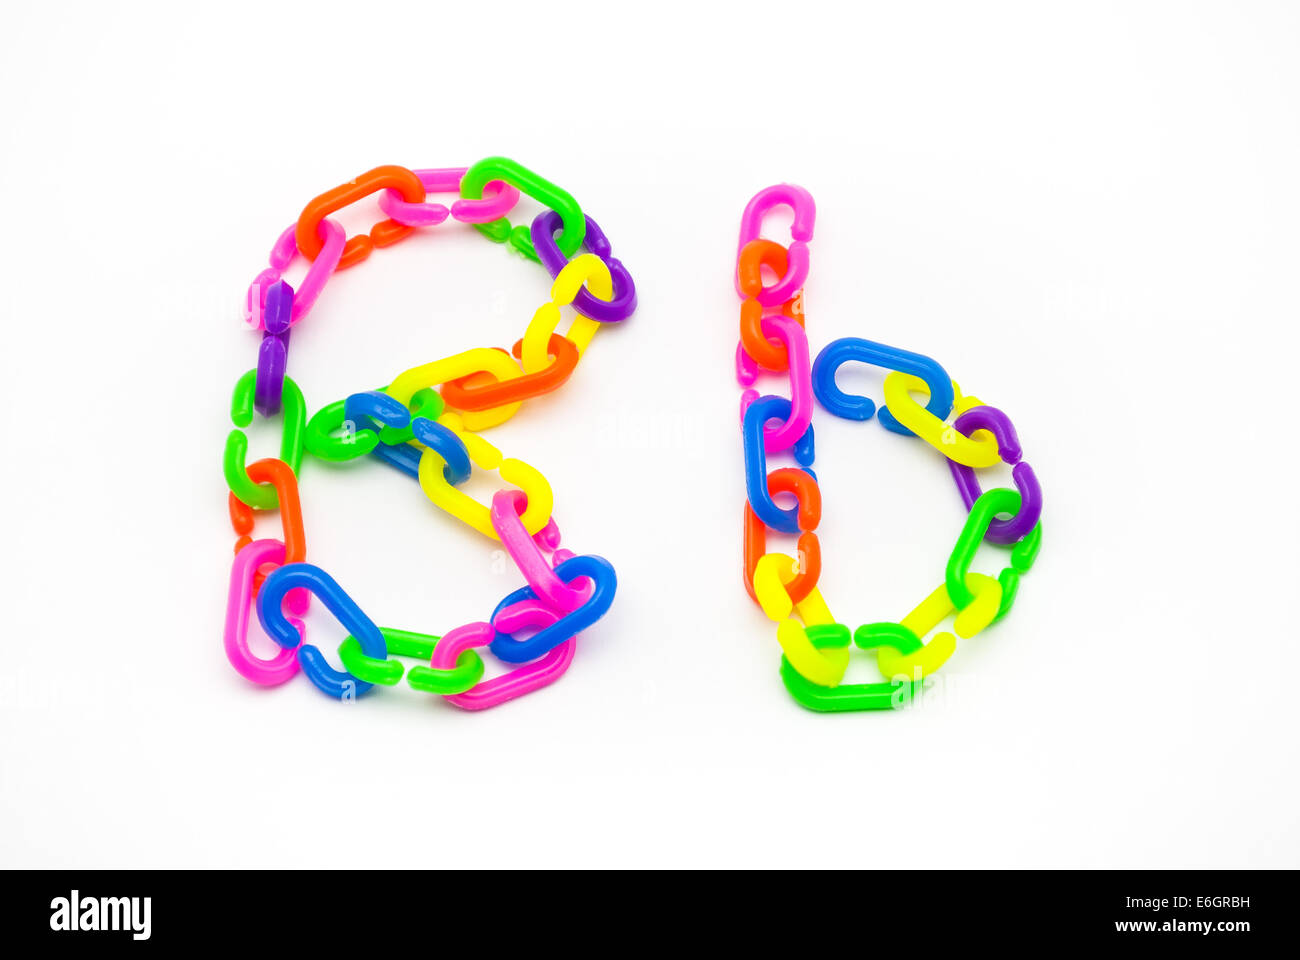 B and b Alphabet, Created by Colorful Plastic Chain. Stock Photo